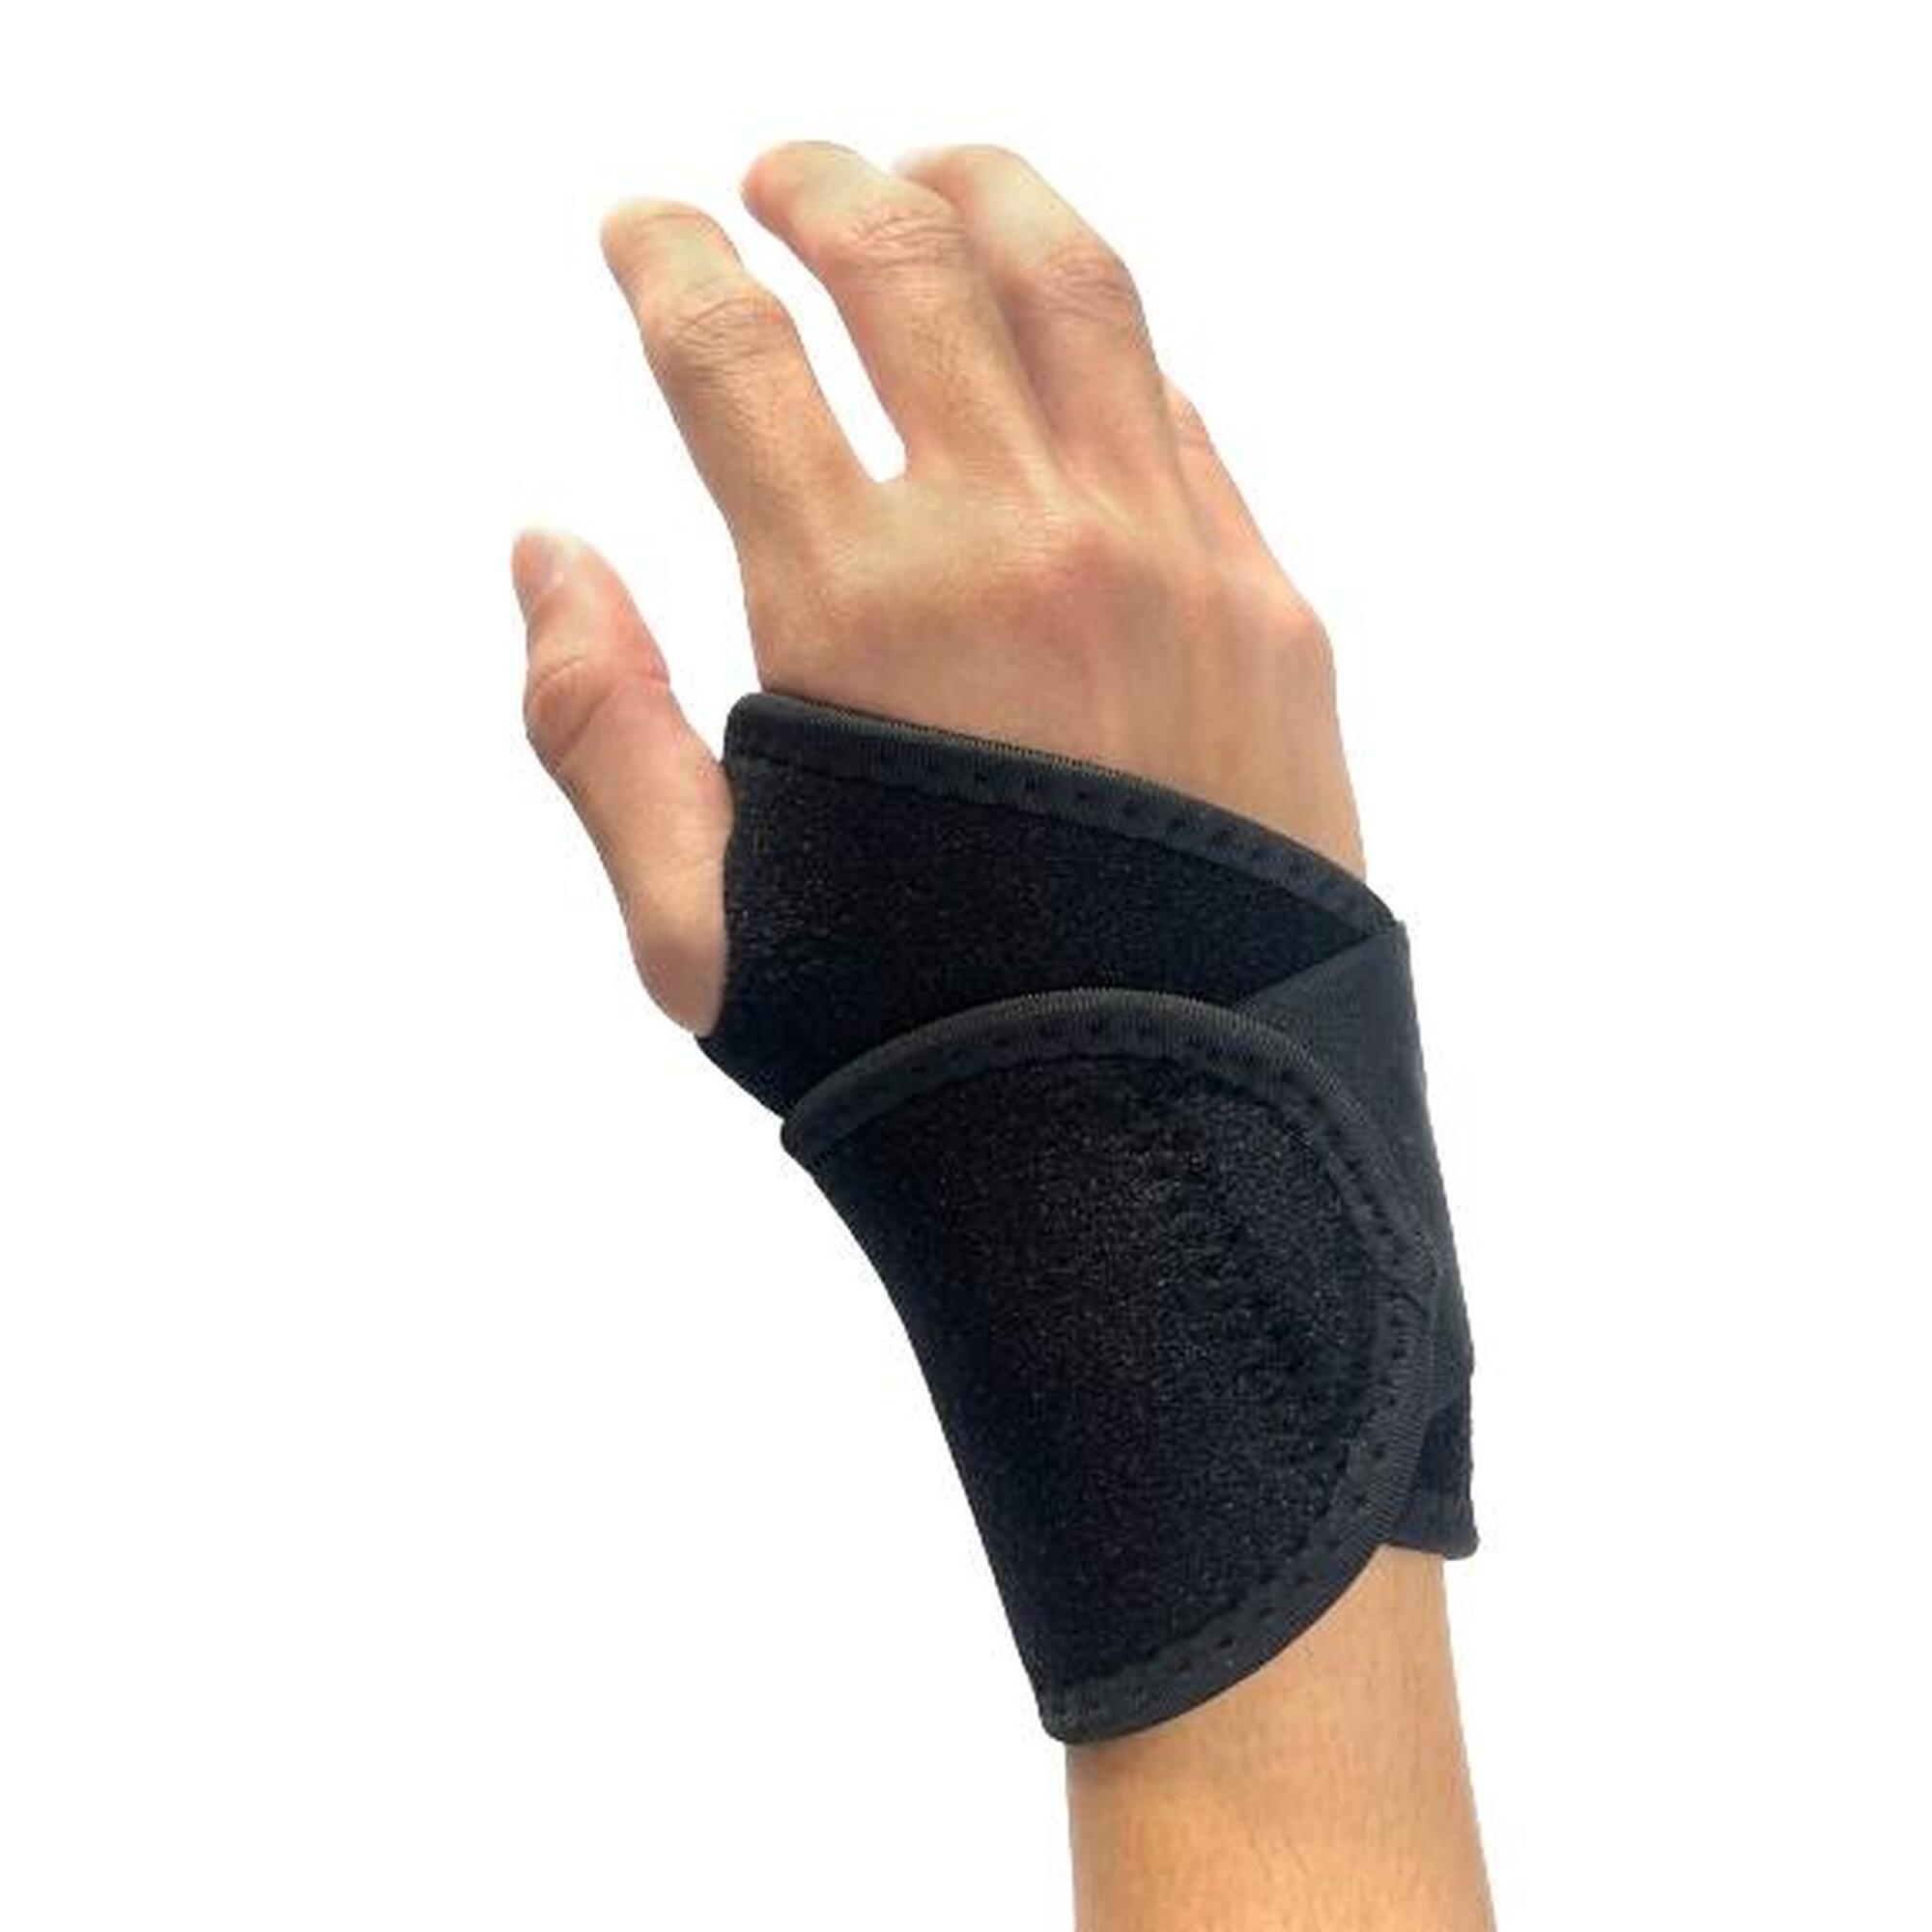 WRIST BRACE NEOPRENE (Suitable for both left and right hands) - BLACK